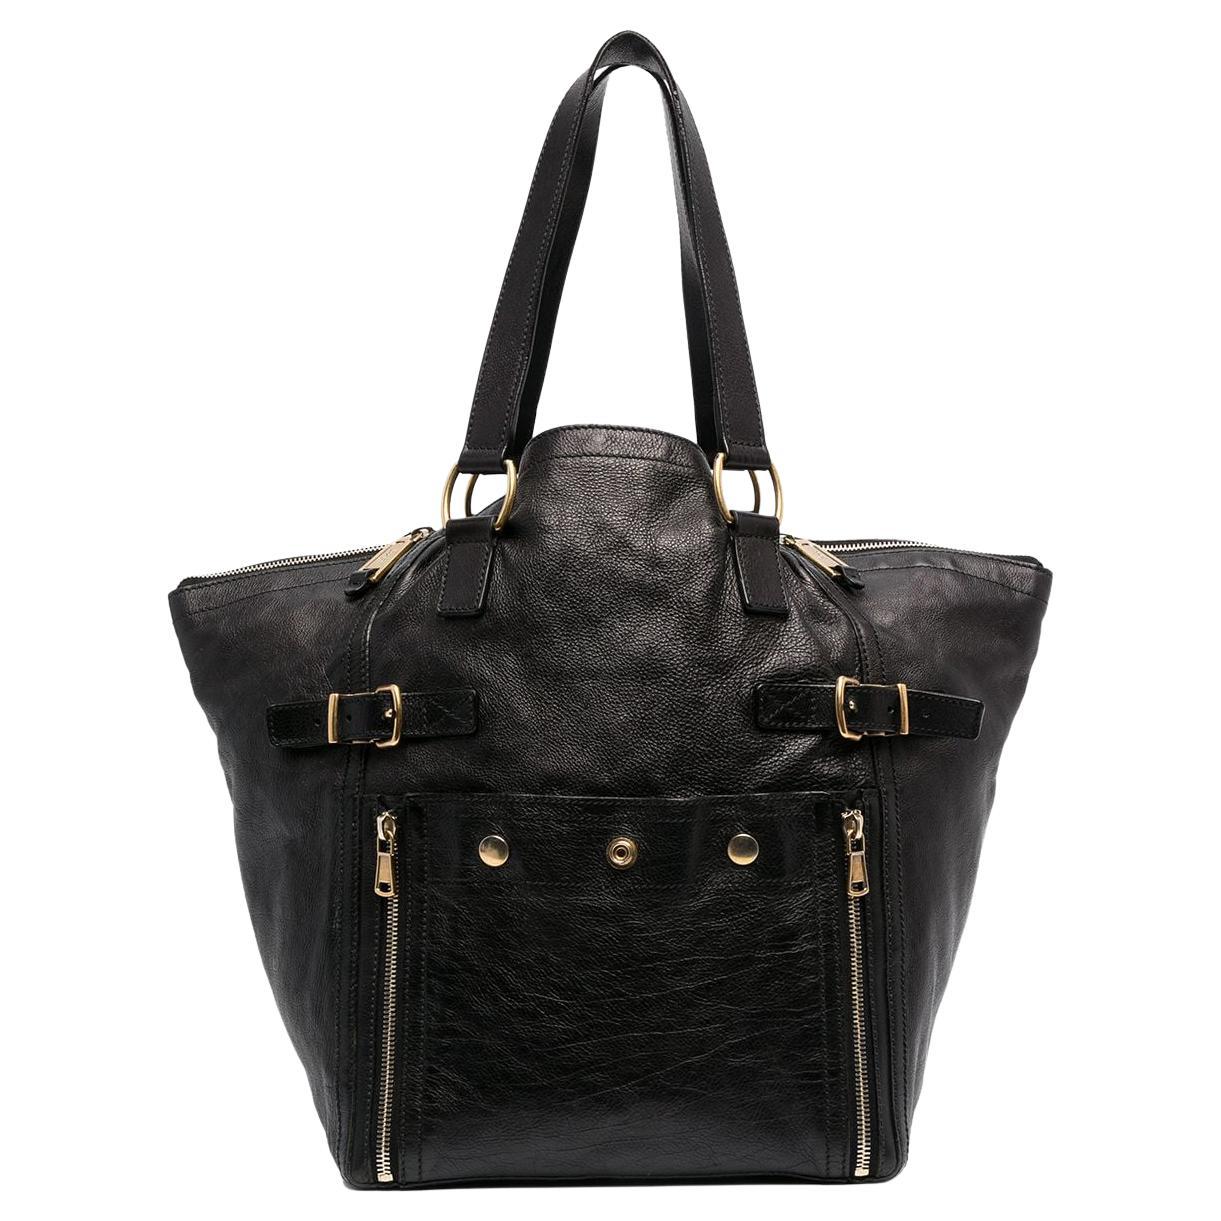 Yves Saint Laurent YSL Black Leather Downtown Tote Bag